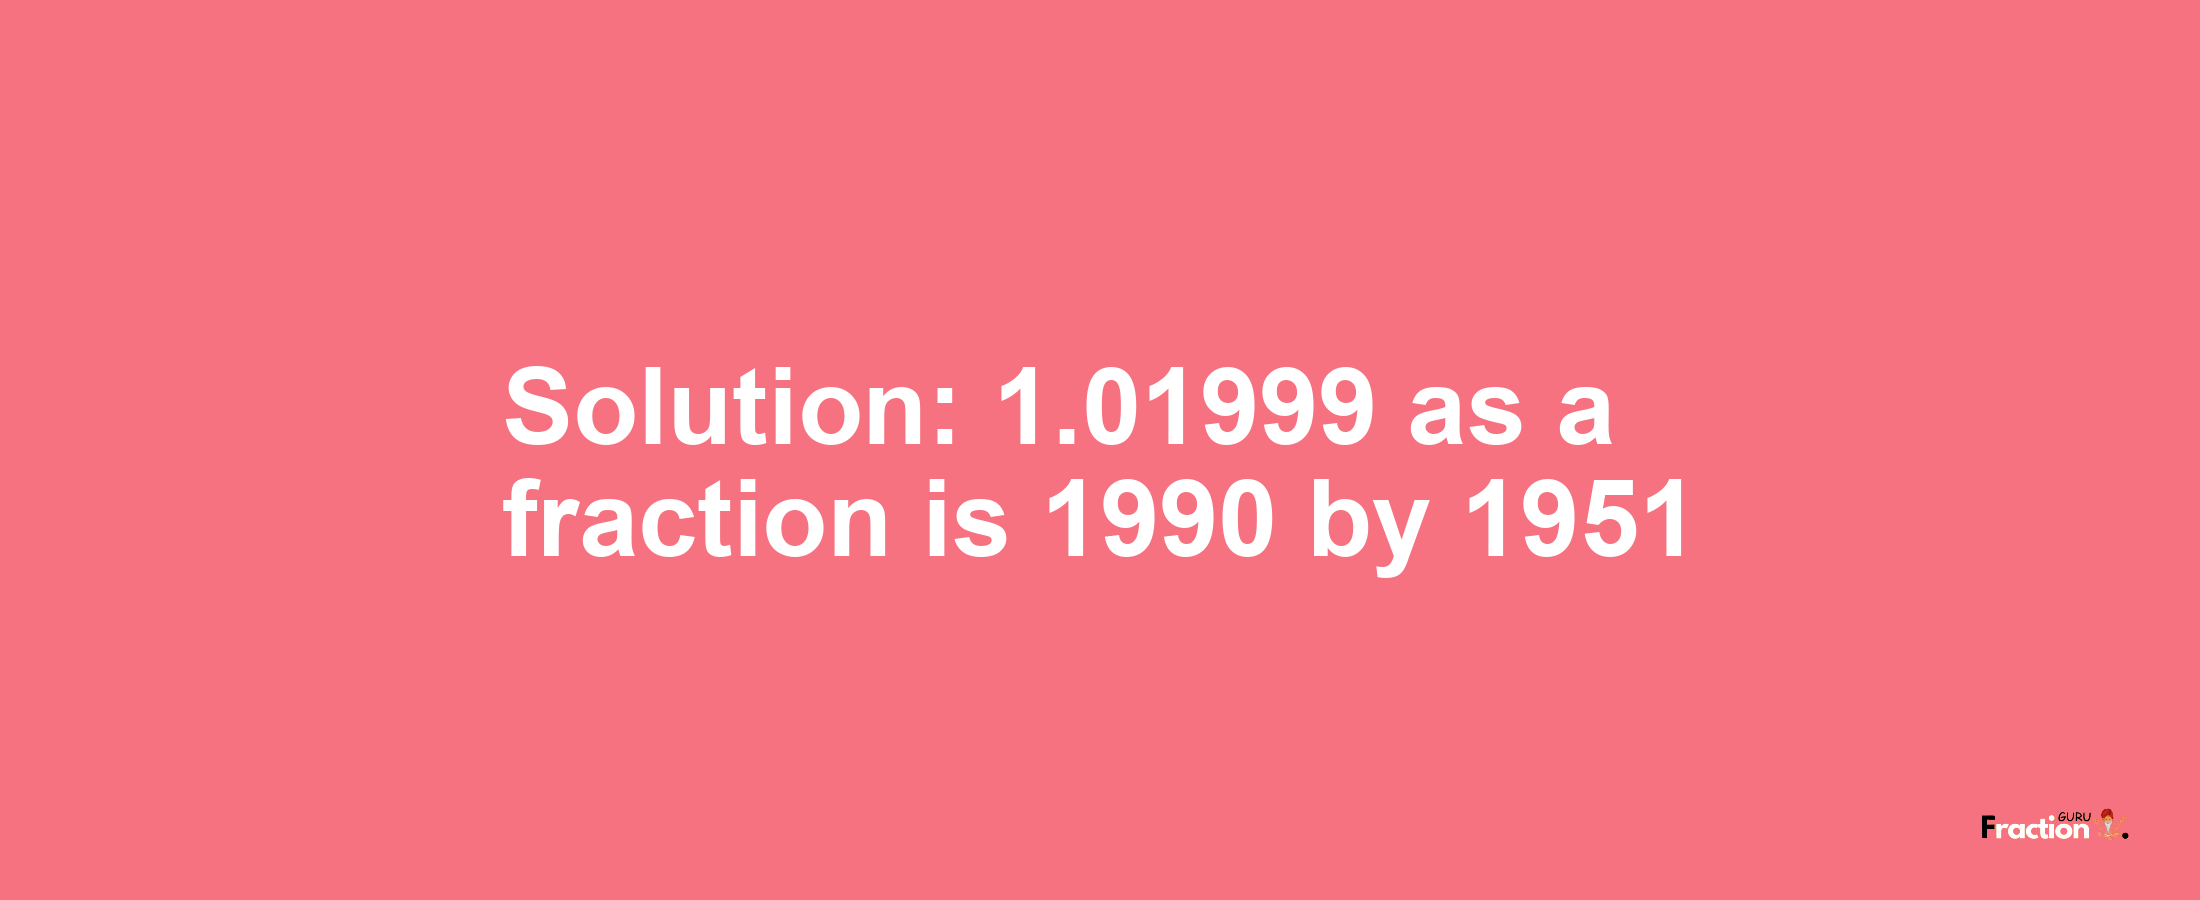 Solution:1.01999 as a fraction is 1990/1951